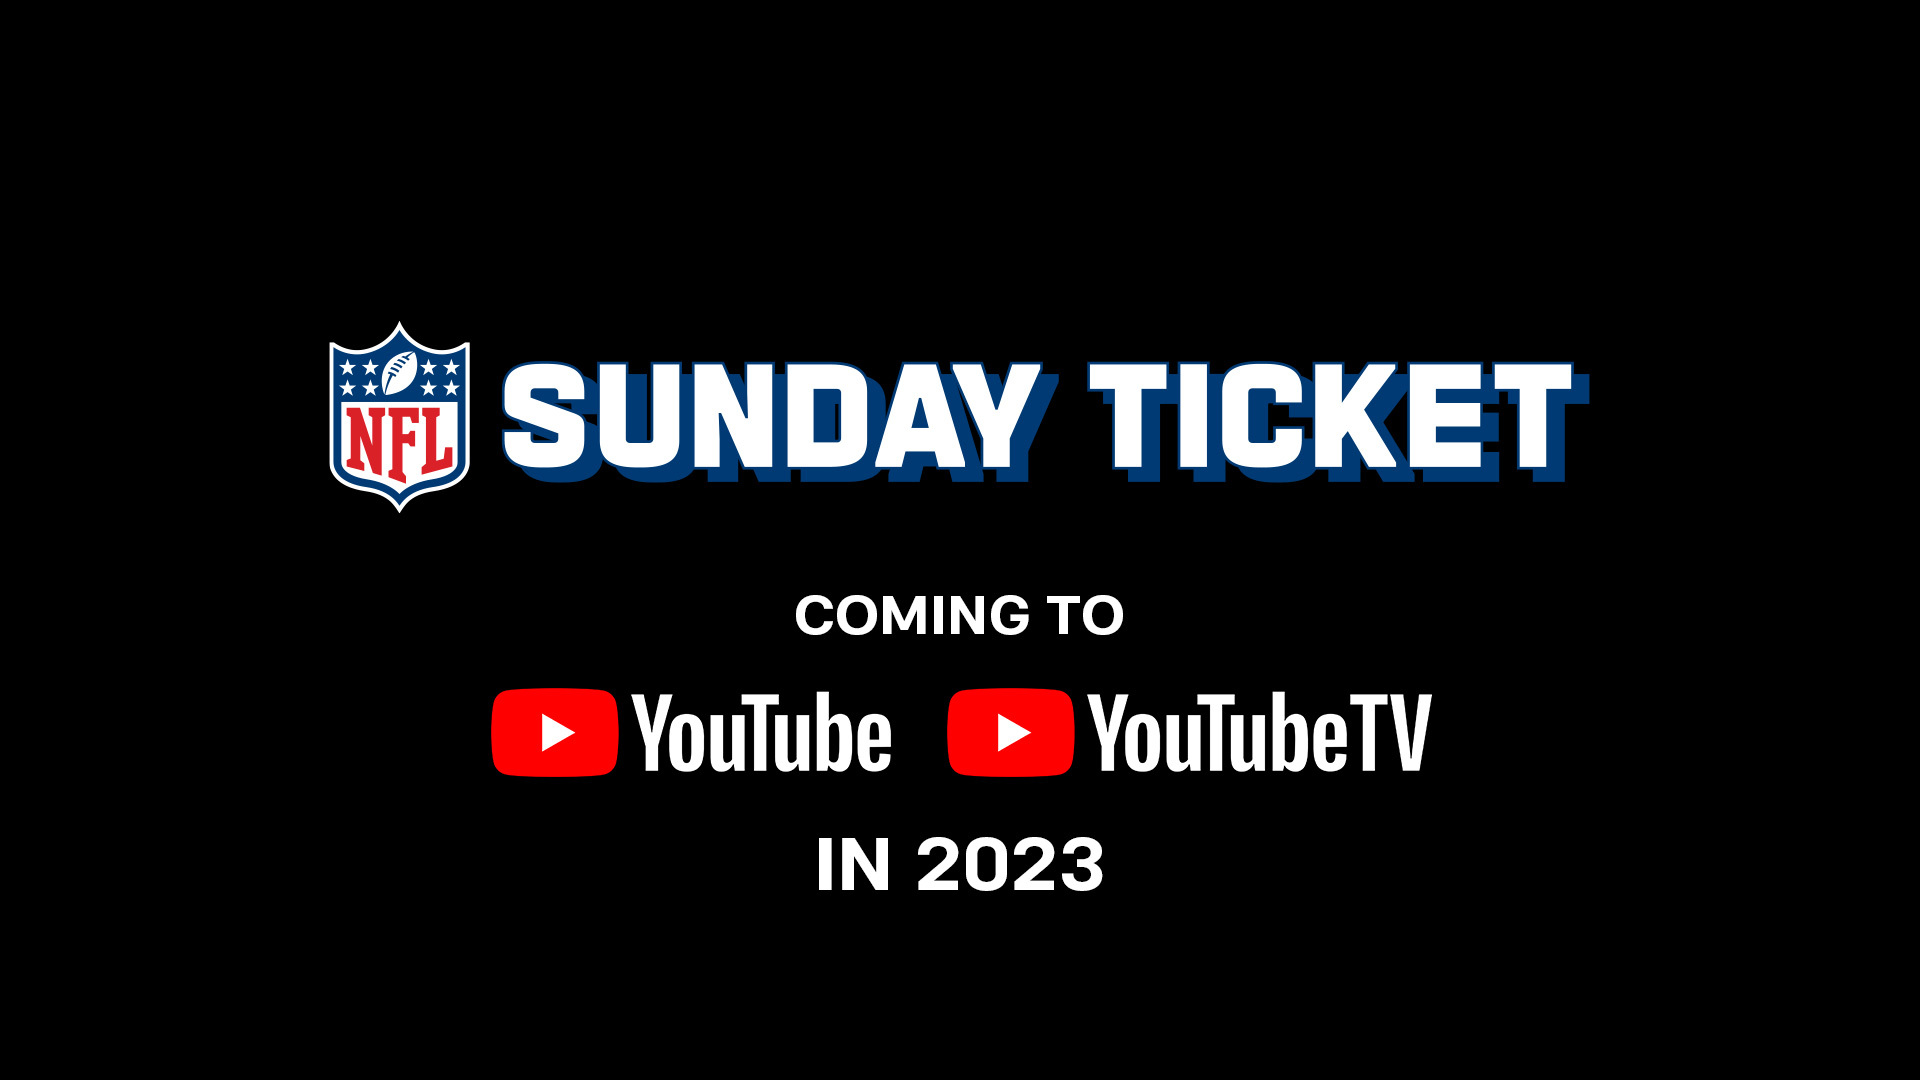 Learn about NFL Sunday Ticket on   &   TV -   TV